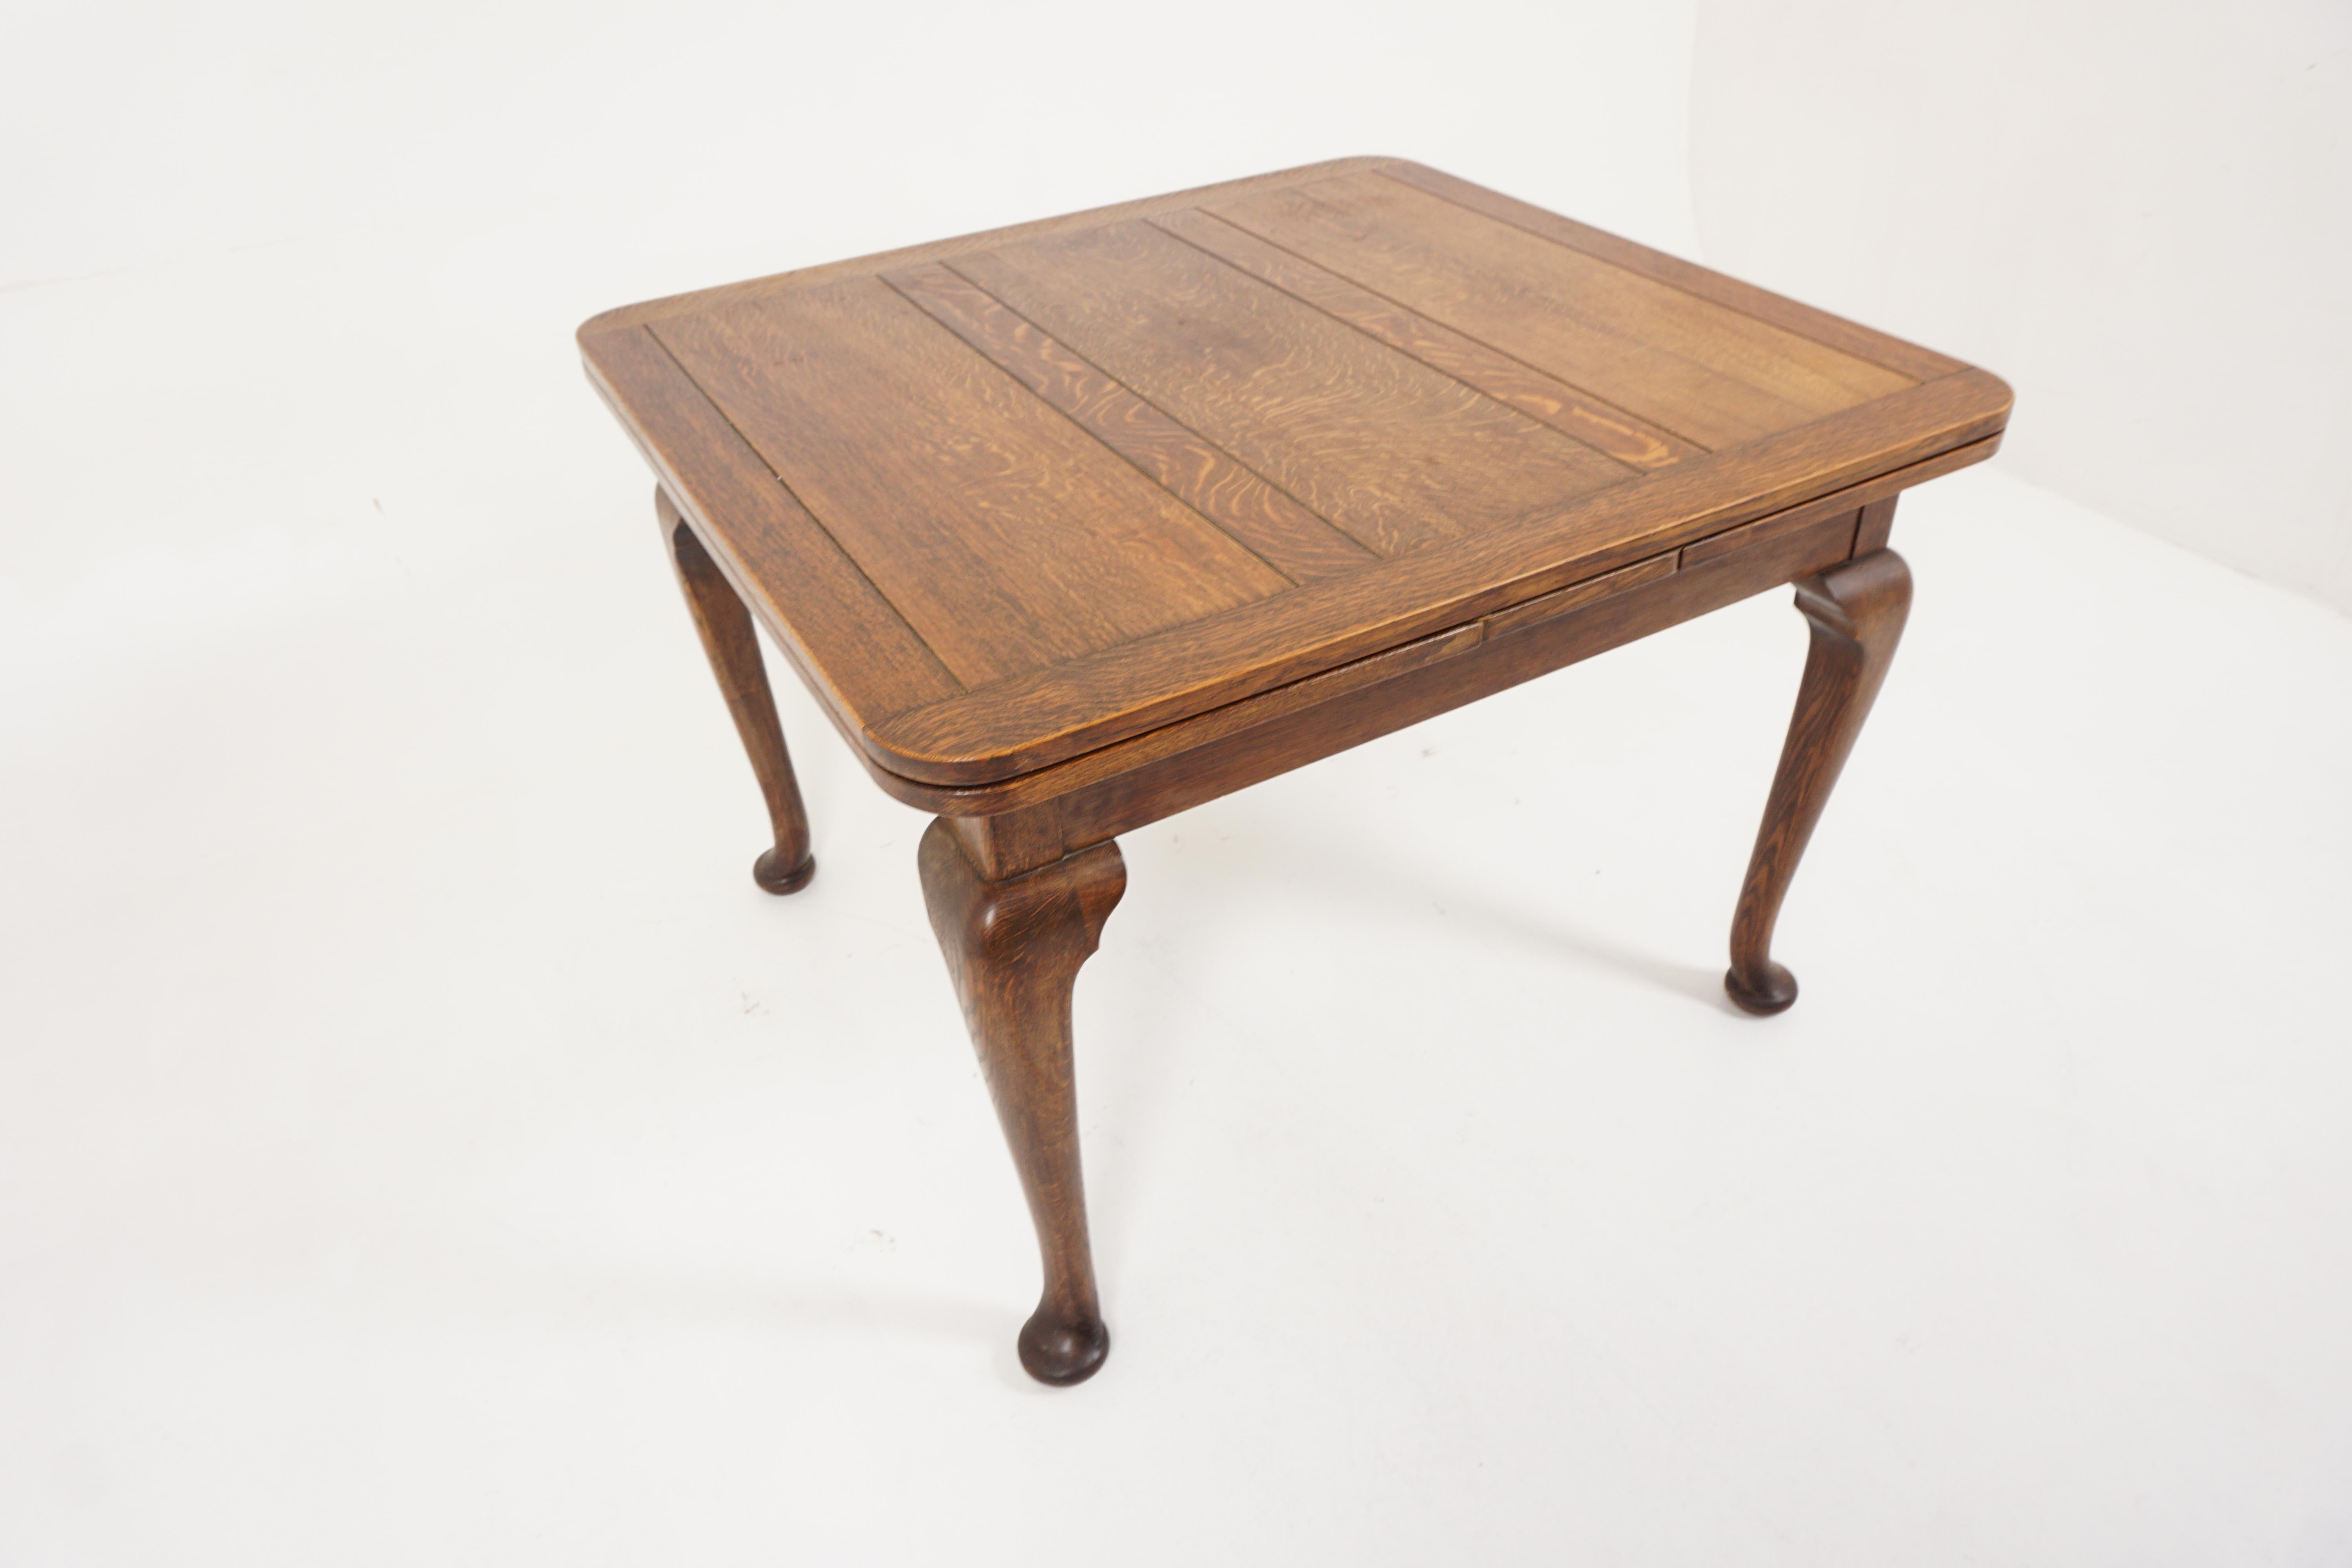 Vintage tiger oak draw leaf, pull out table, Queen Anne, Scotland 1930, B2574

Scotland 1930
Solid oak
Original finish
Rectangular paneled top with rounded ends
Pair of hidden leaves underneath that can pulled out to extend the table
All